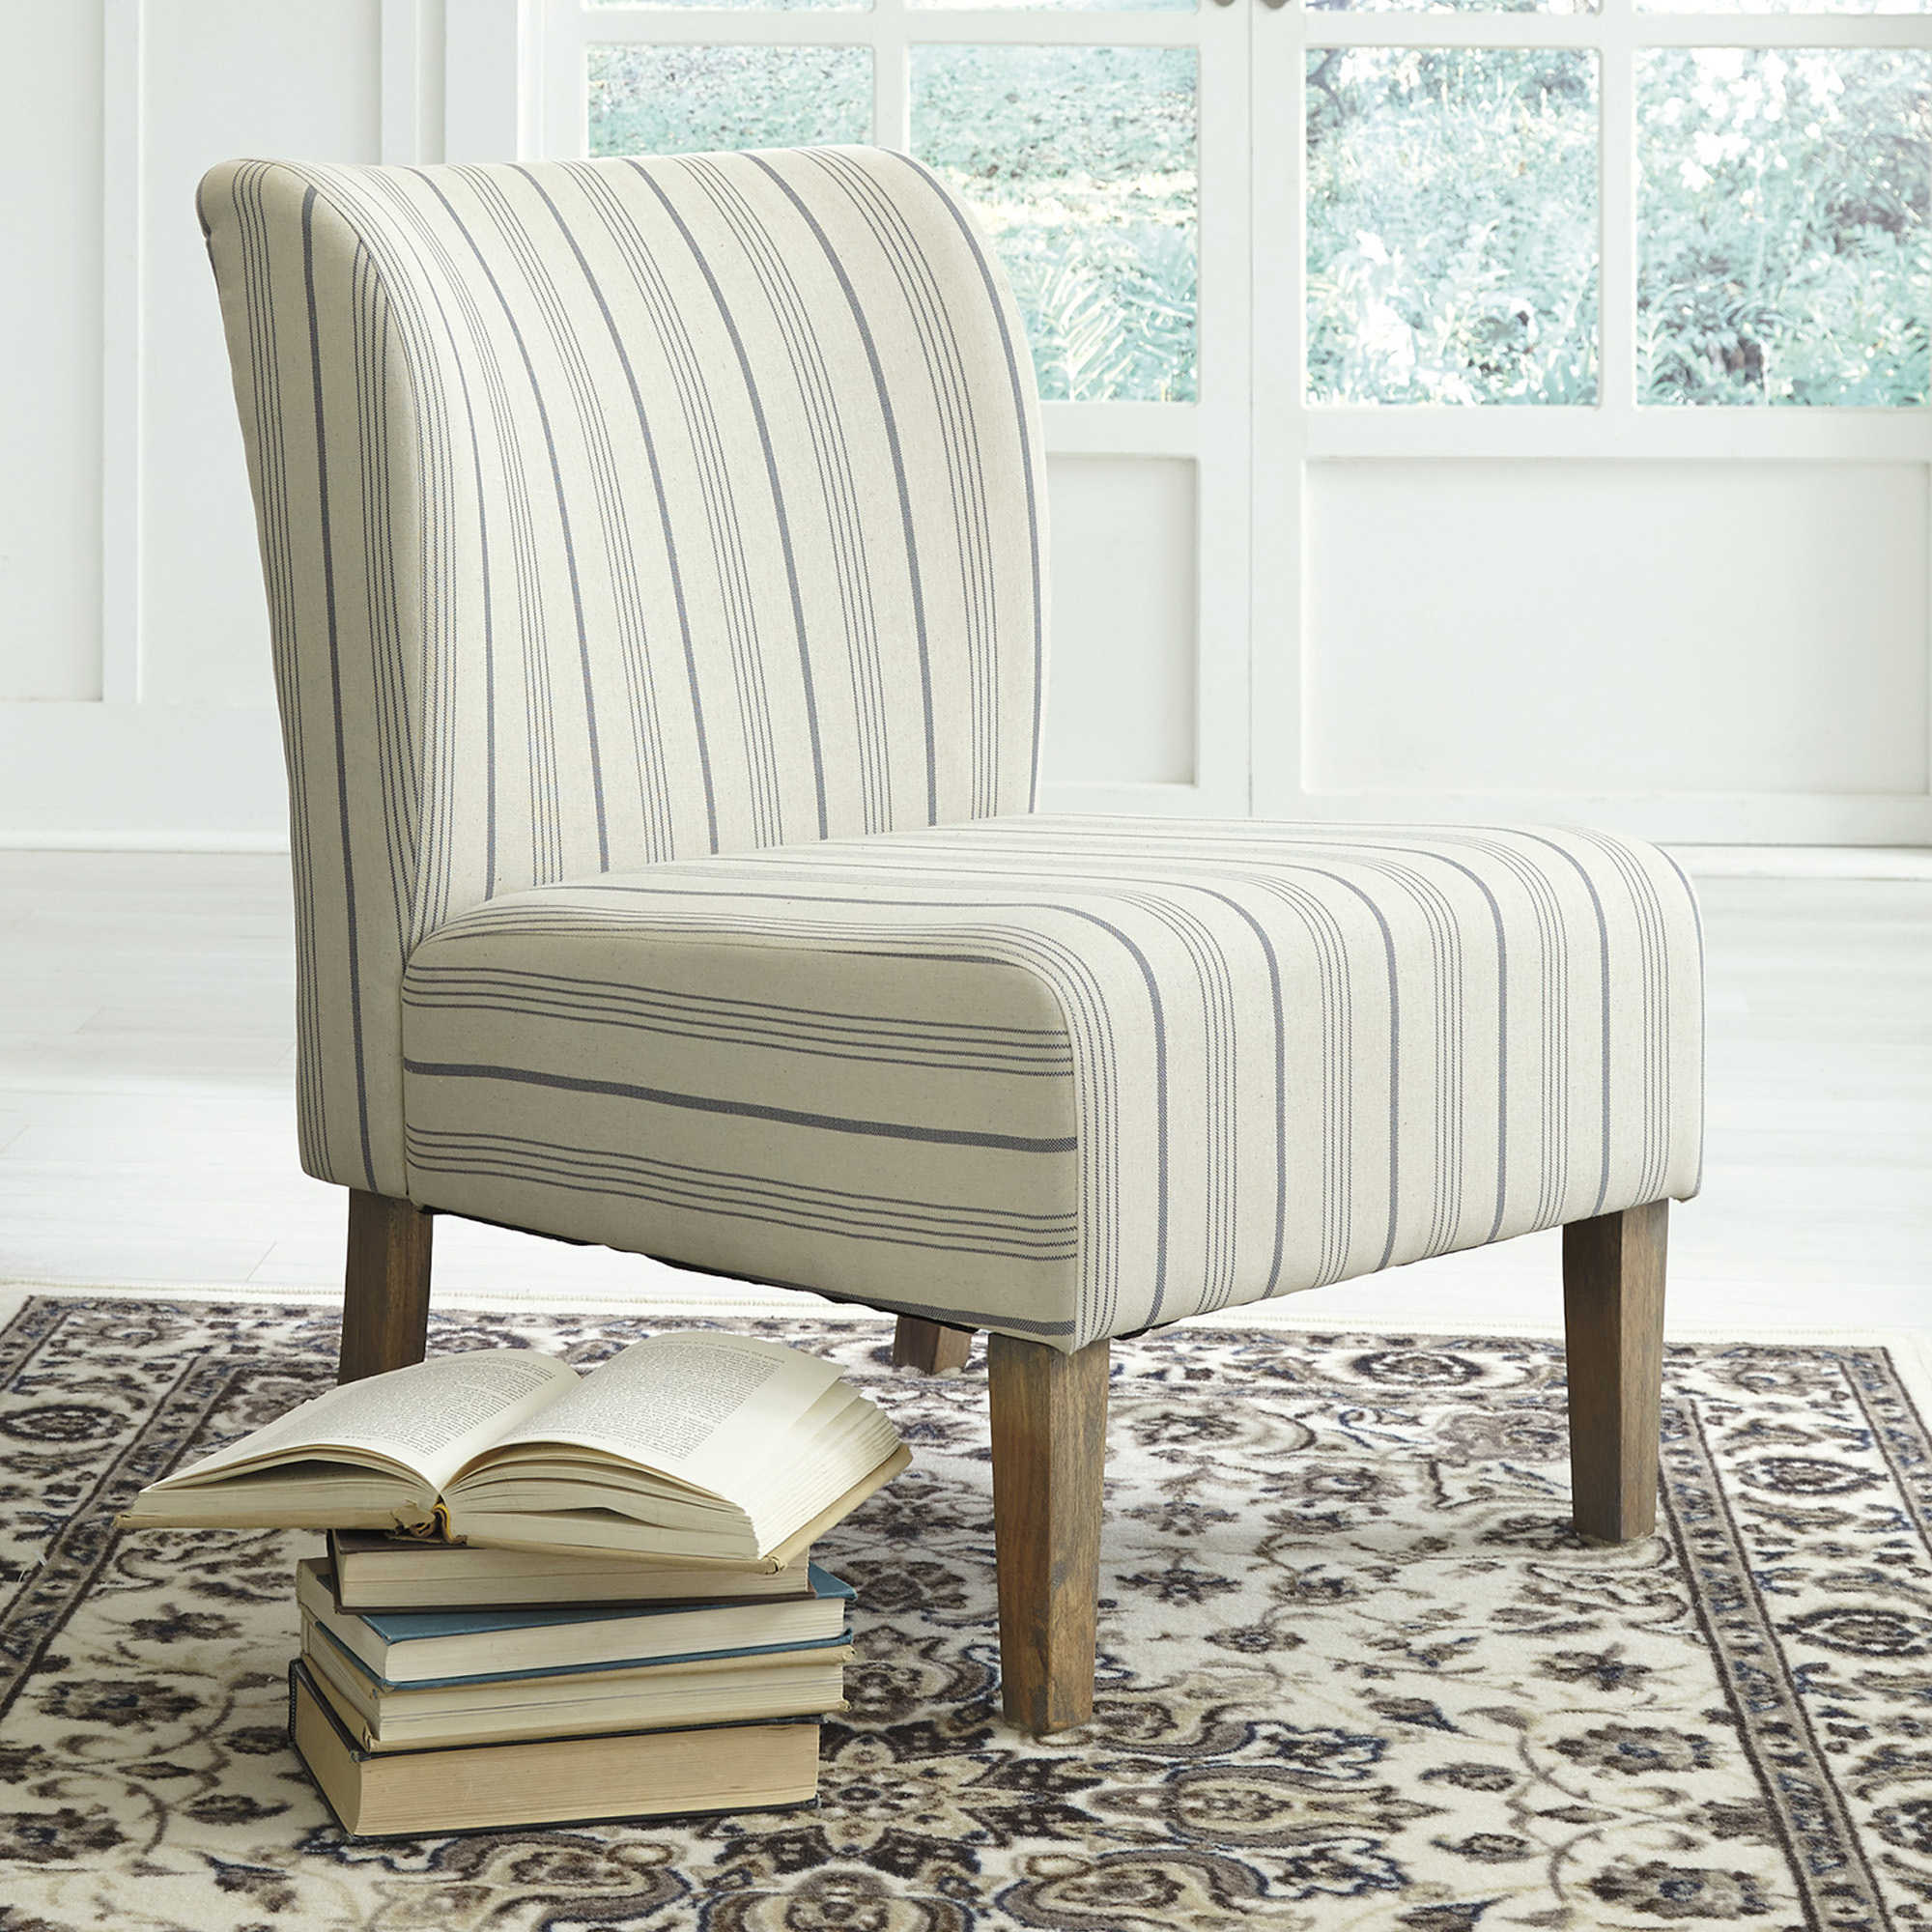 JasperHomeliving Striped Caldwell Accent Chair Temple Webster